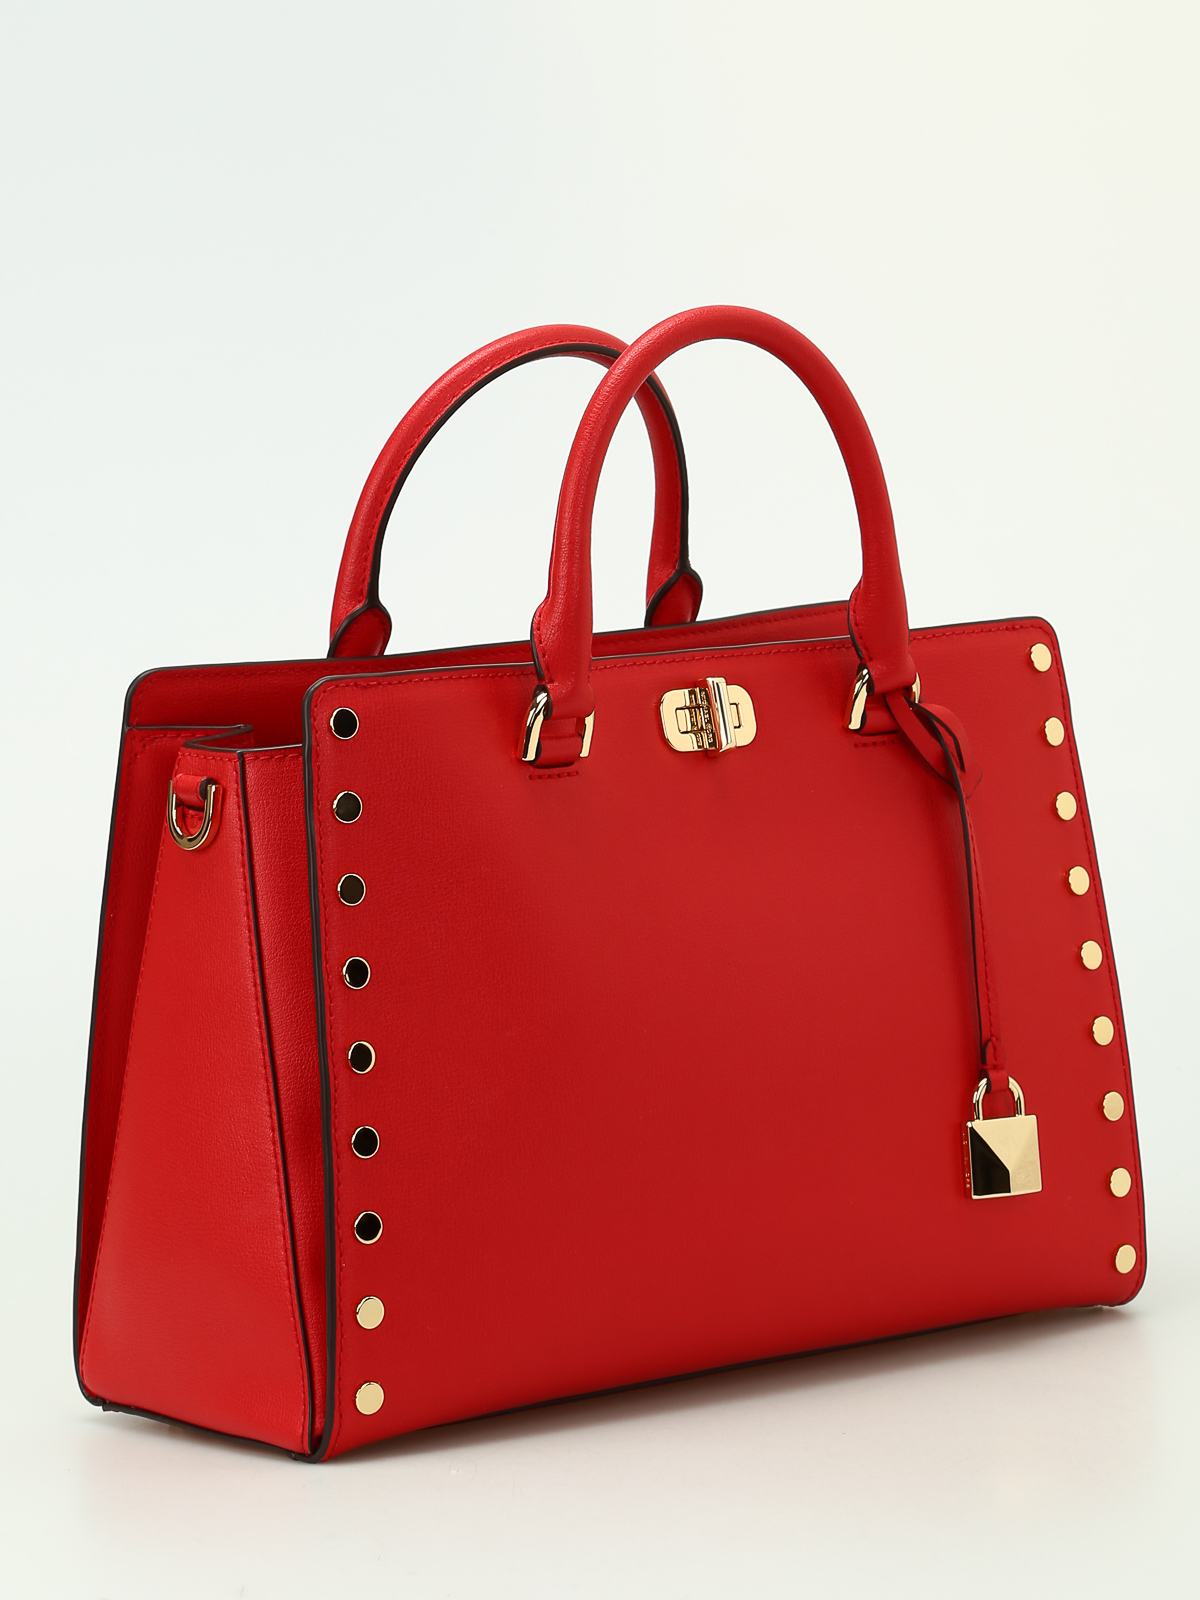 Michael Kors - Sylvie Stud red leather large tote - totes bags - 30T7GYFS3L204